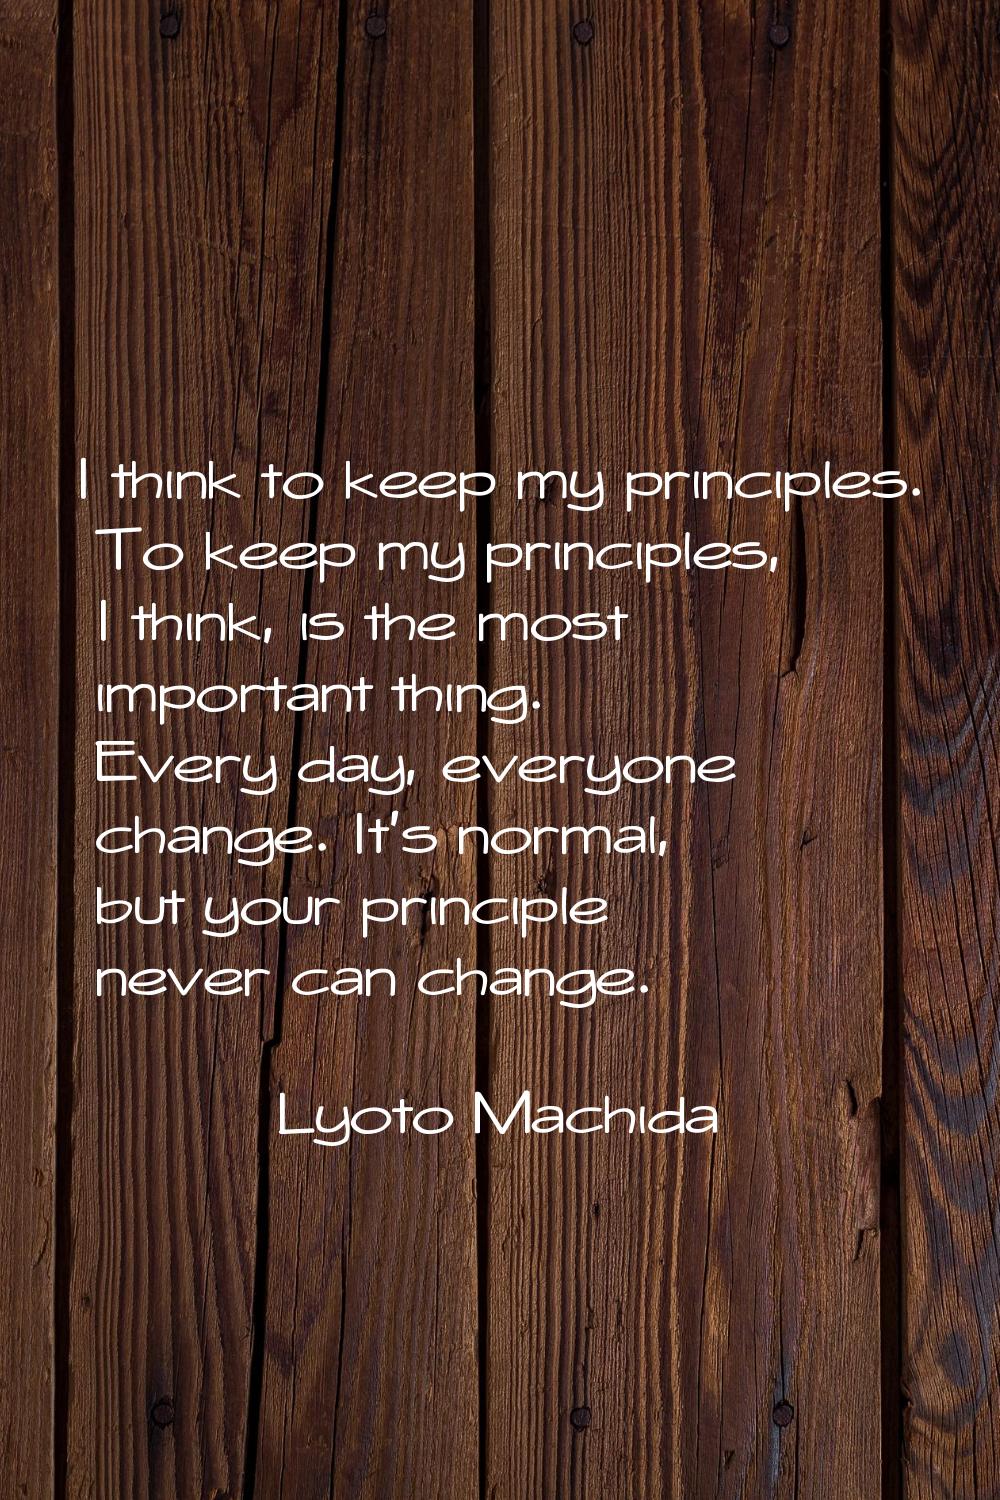 I think to keep my principles. To keep my principles, I think, is the most important thing. Every d